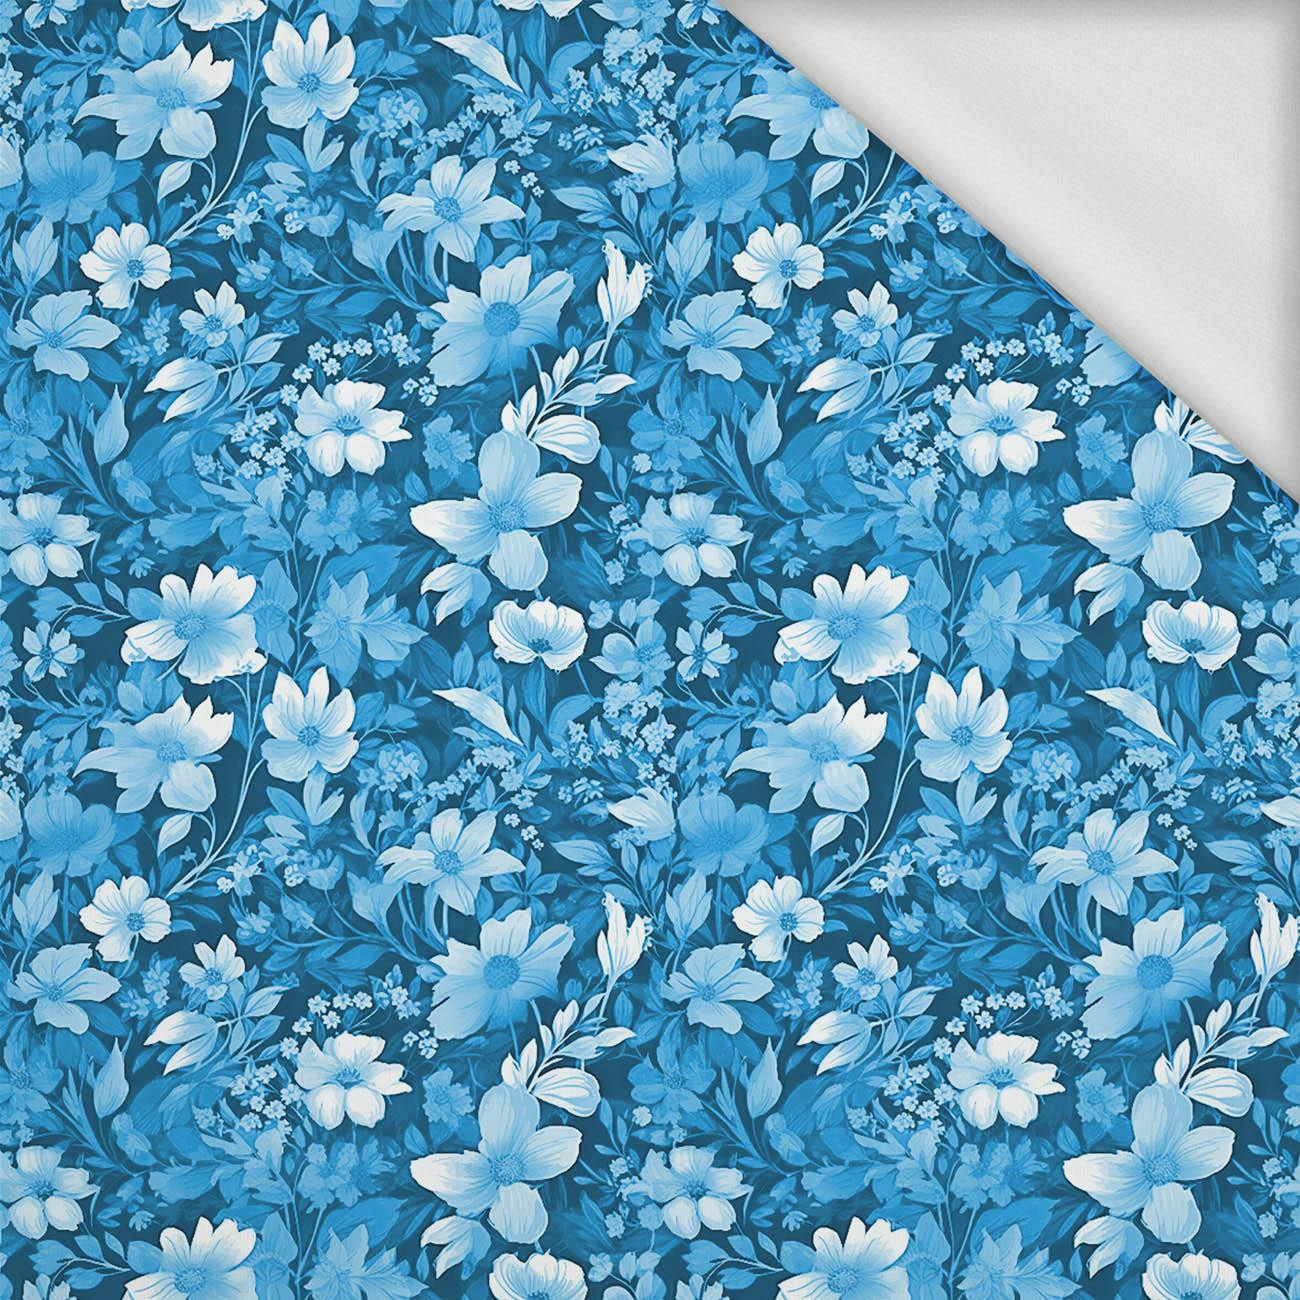 TRANQUIL BLUE / FLOWERS - Sommersweat